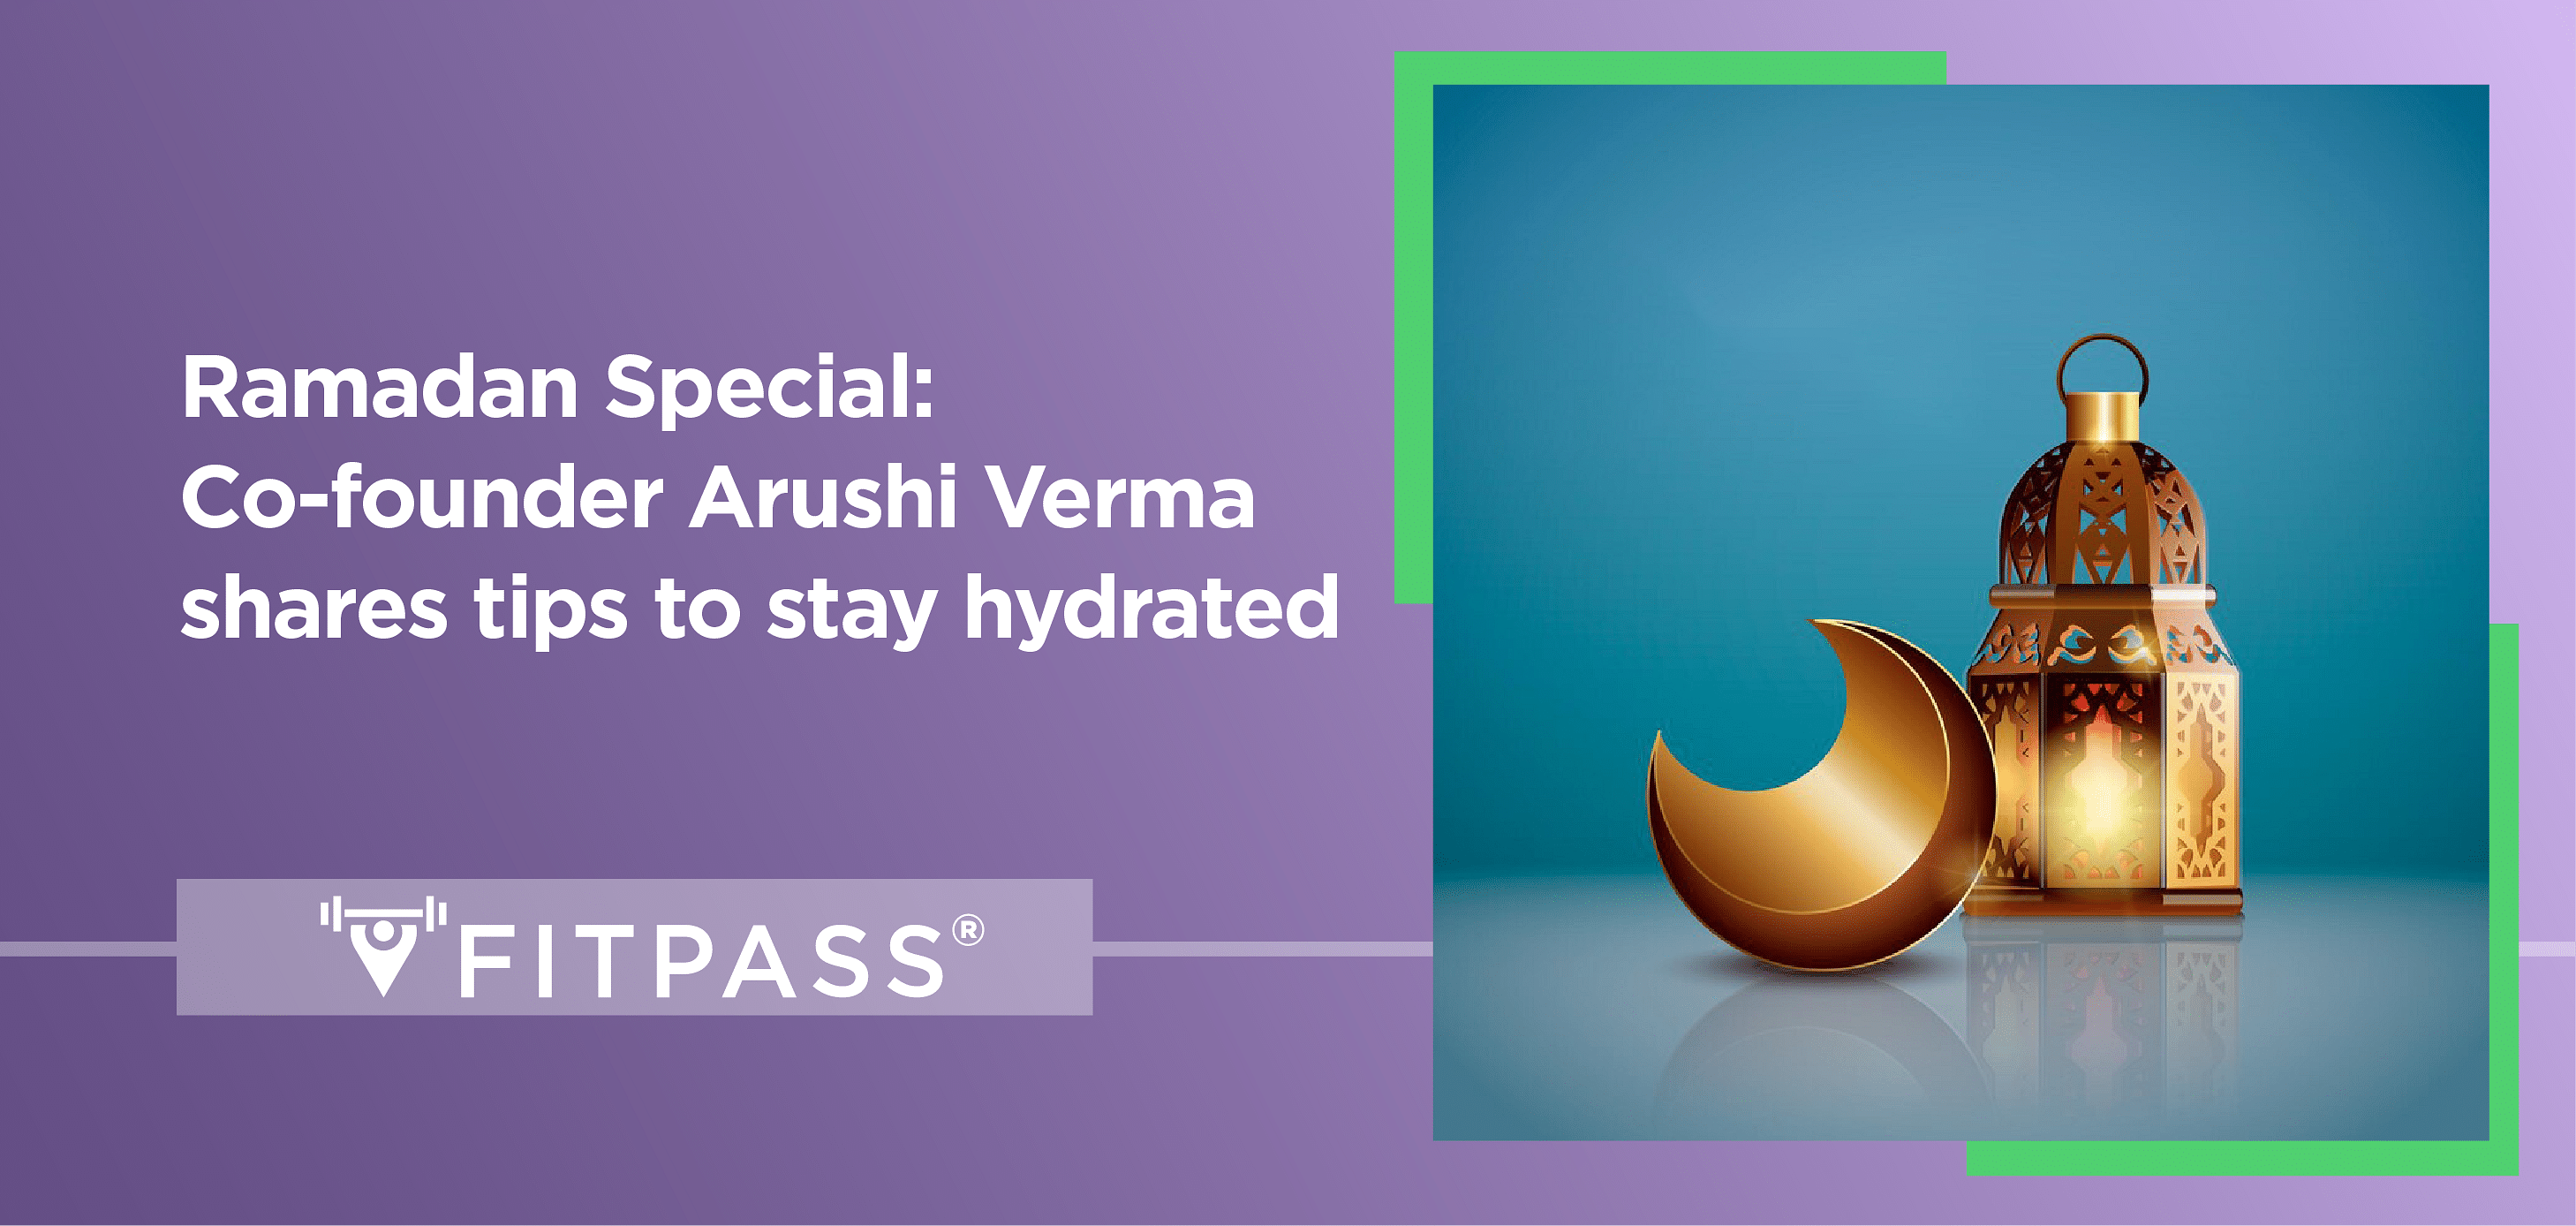 Ramadan Special: Co-founder Arushi Verma shares tips to stay hydrated